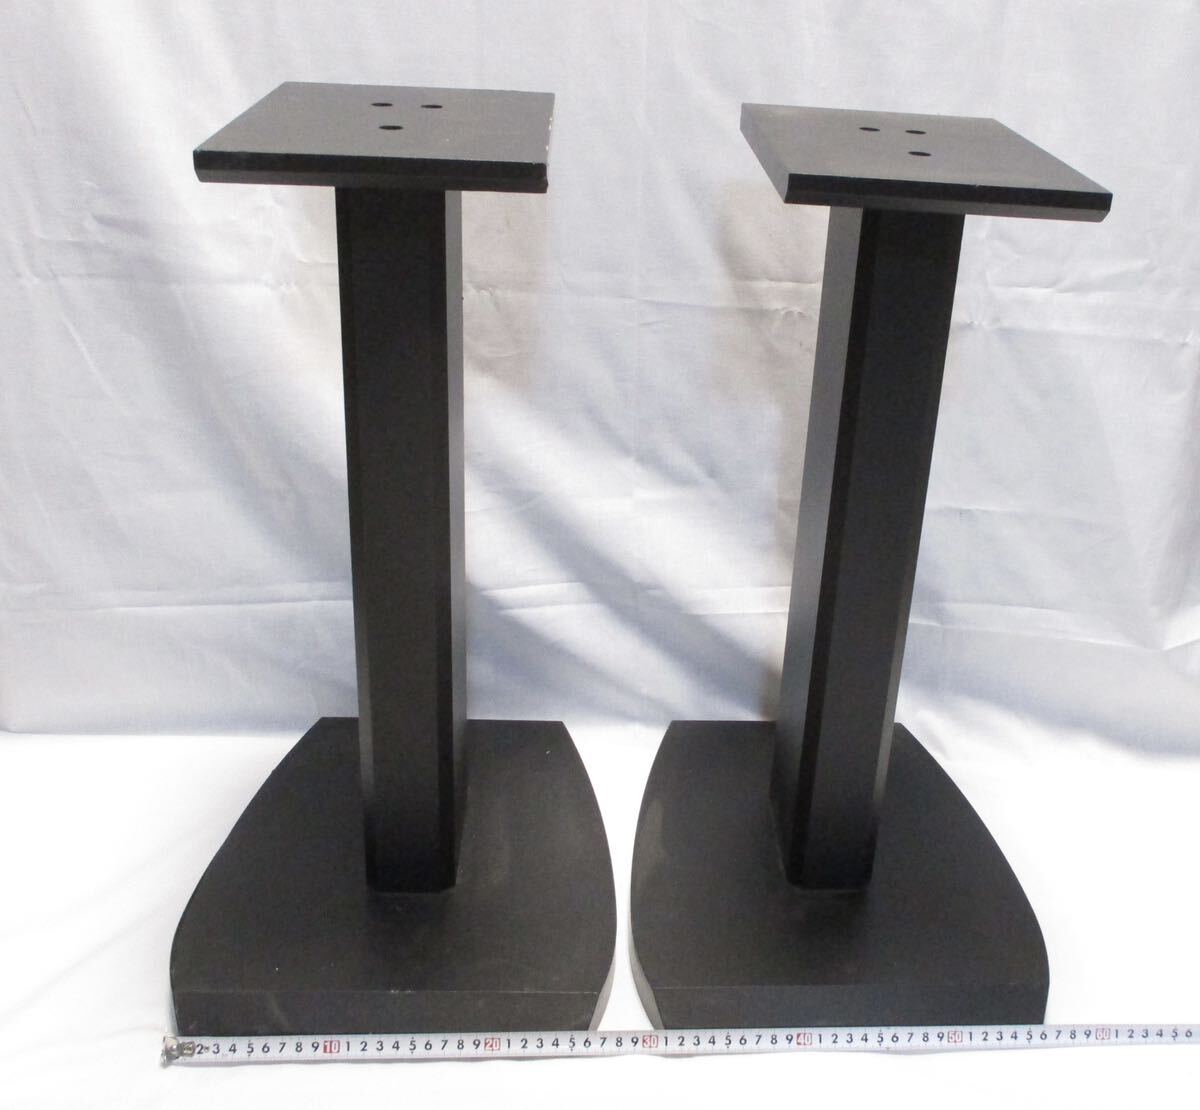 M240510M120* Manufacturers unknown speaker stand * Yahoo auc .... shipping!*